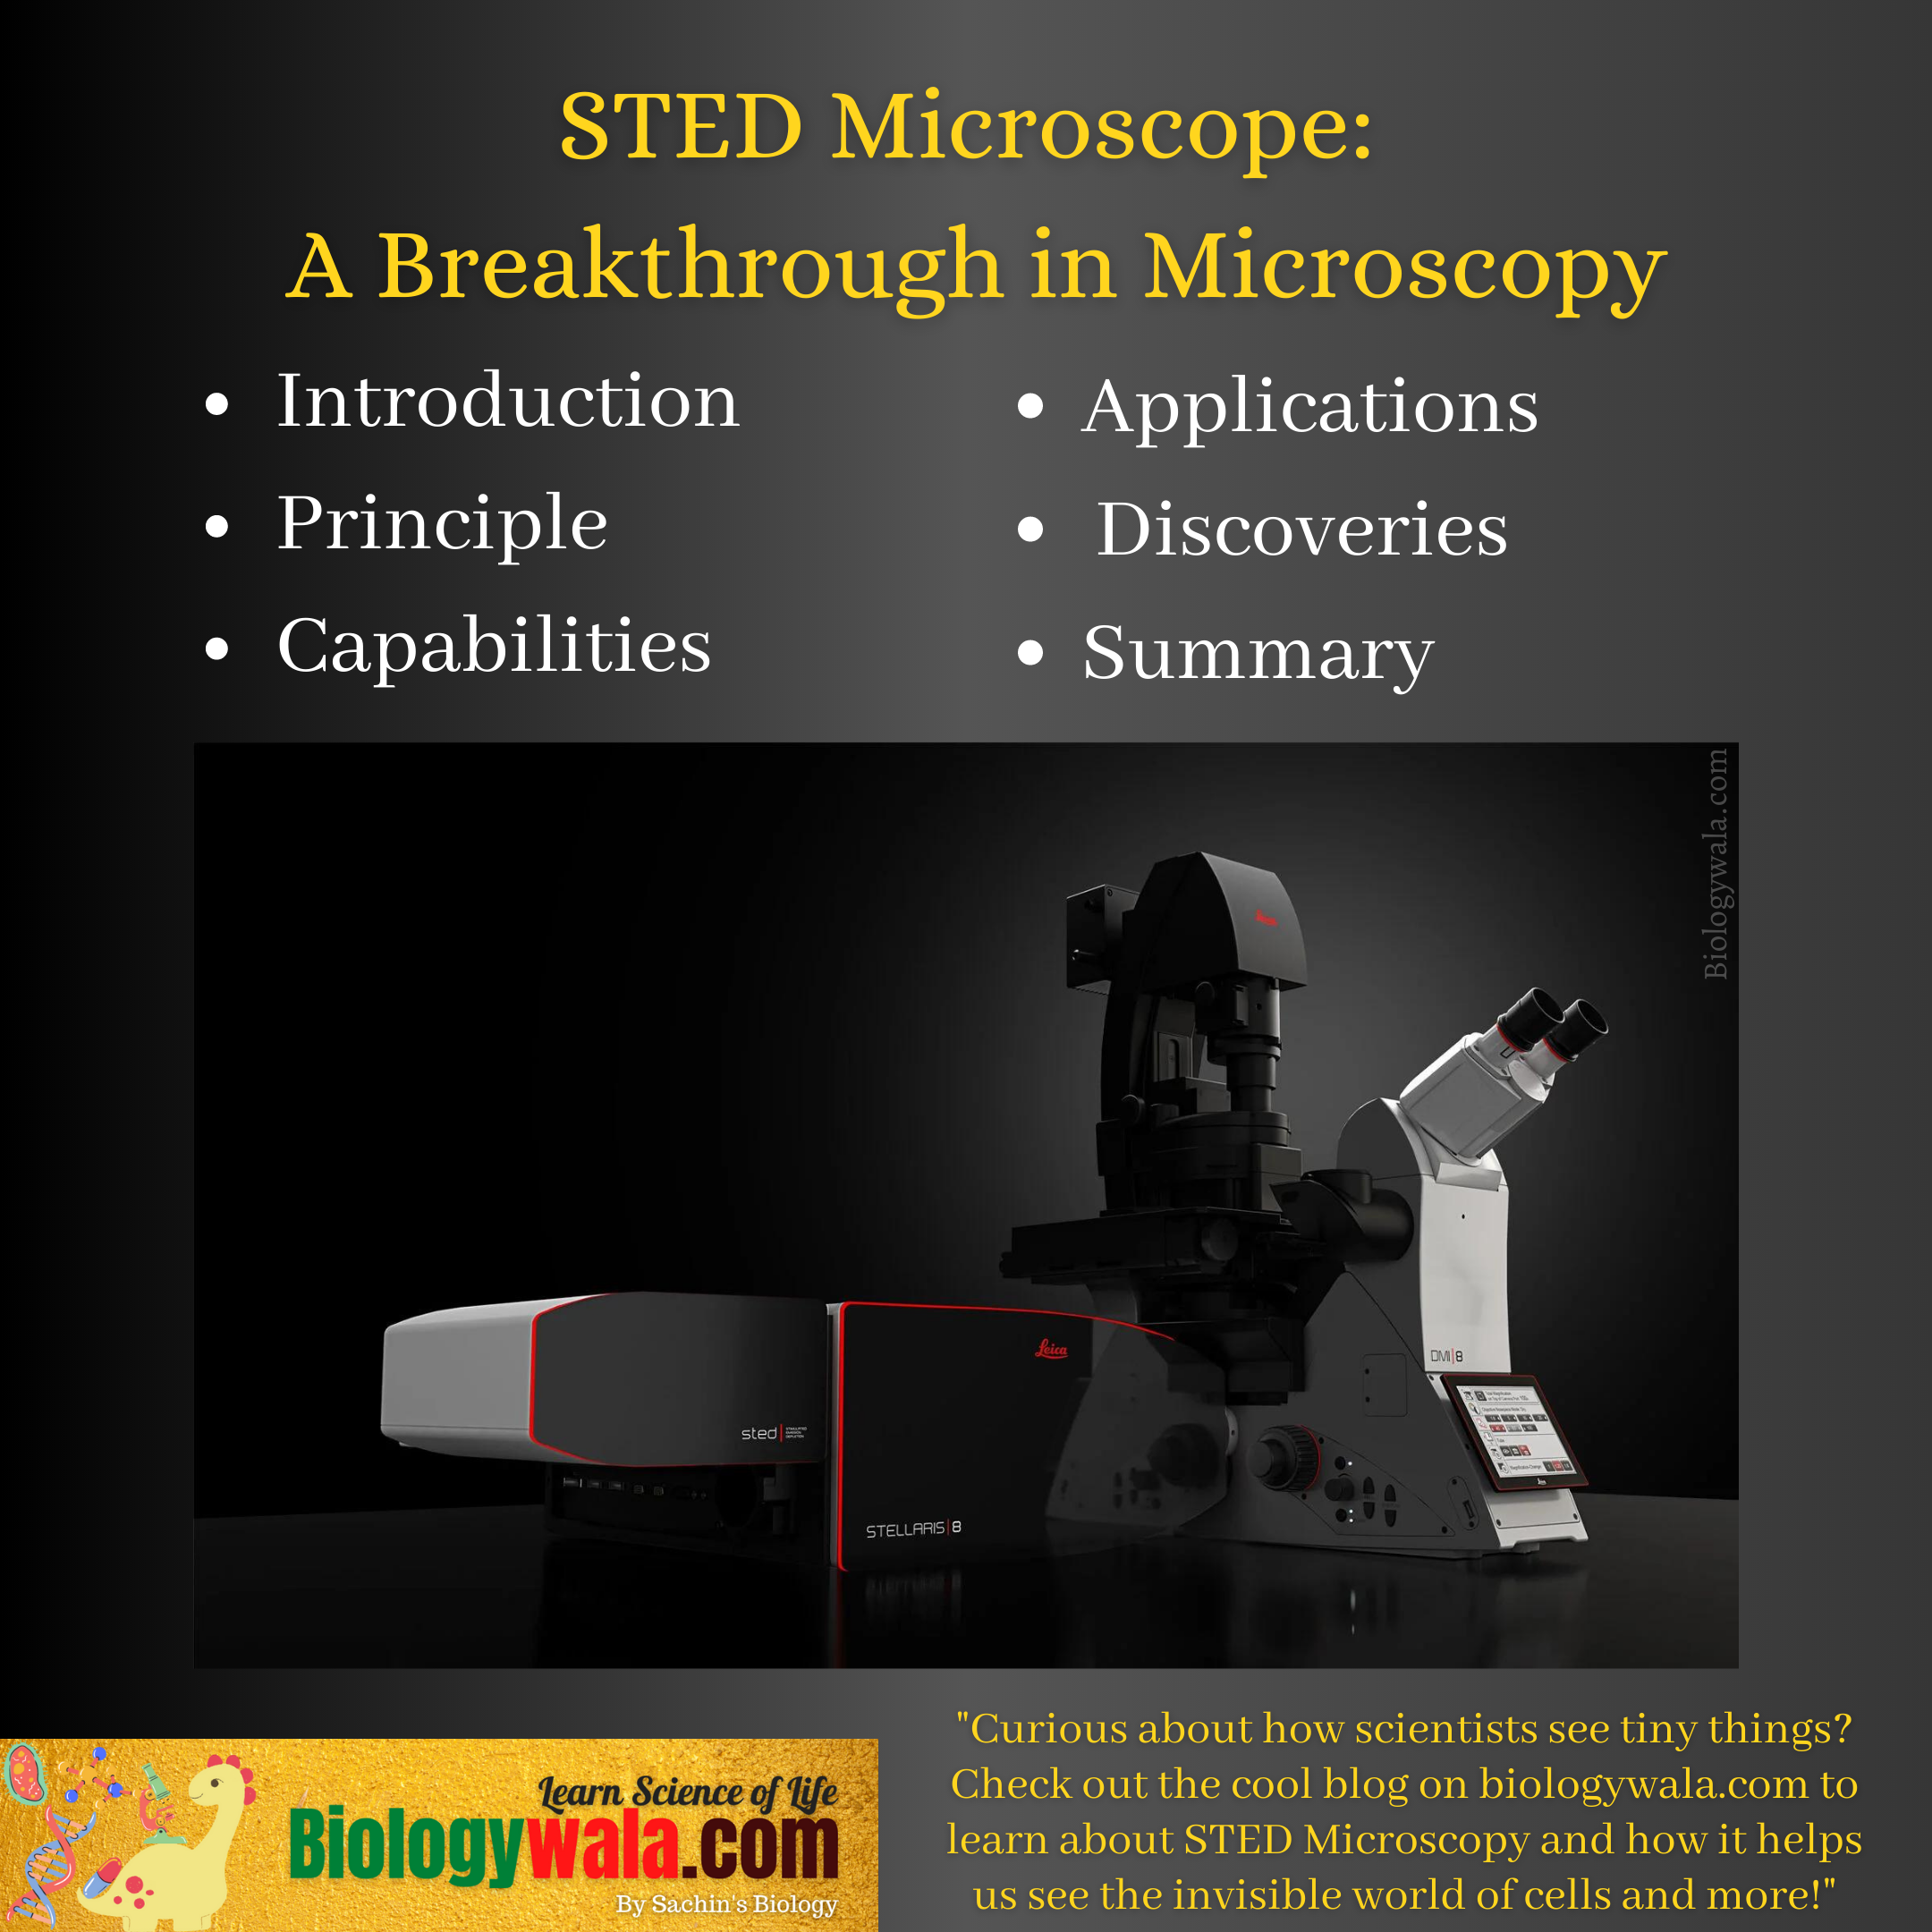 STED Microscope A Breakthrough in Microscopy